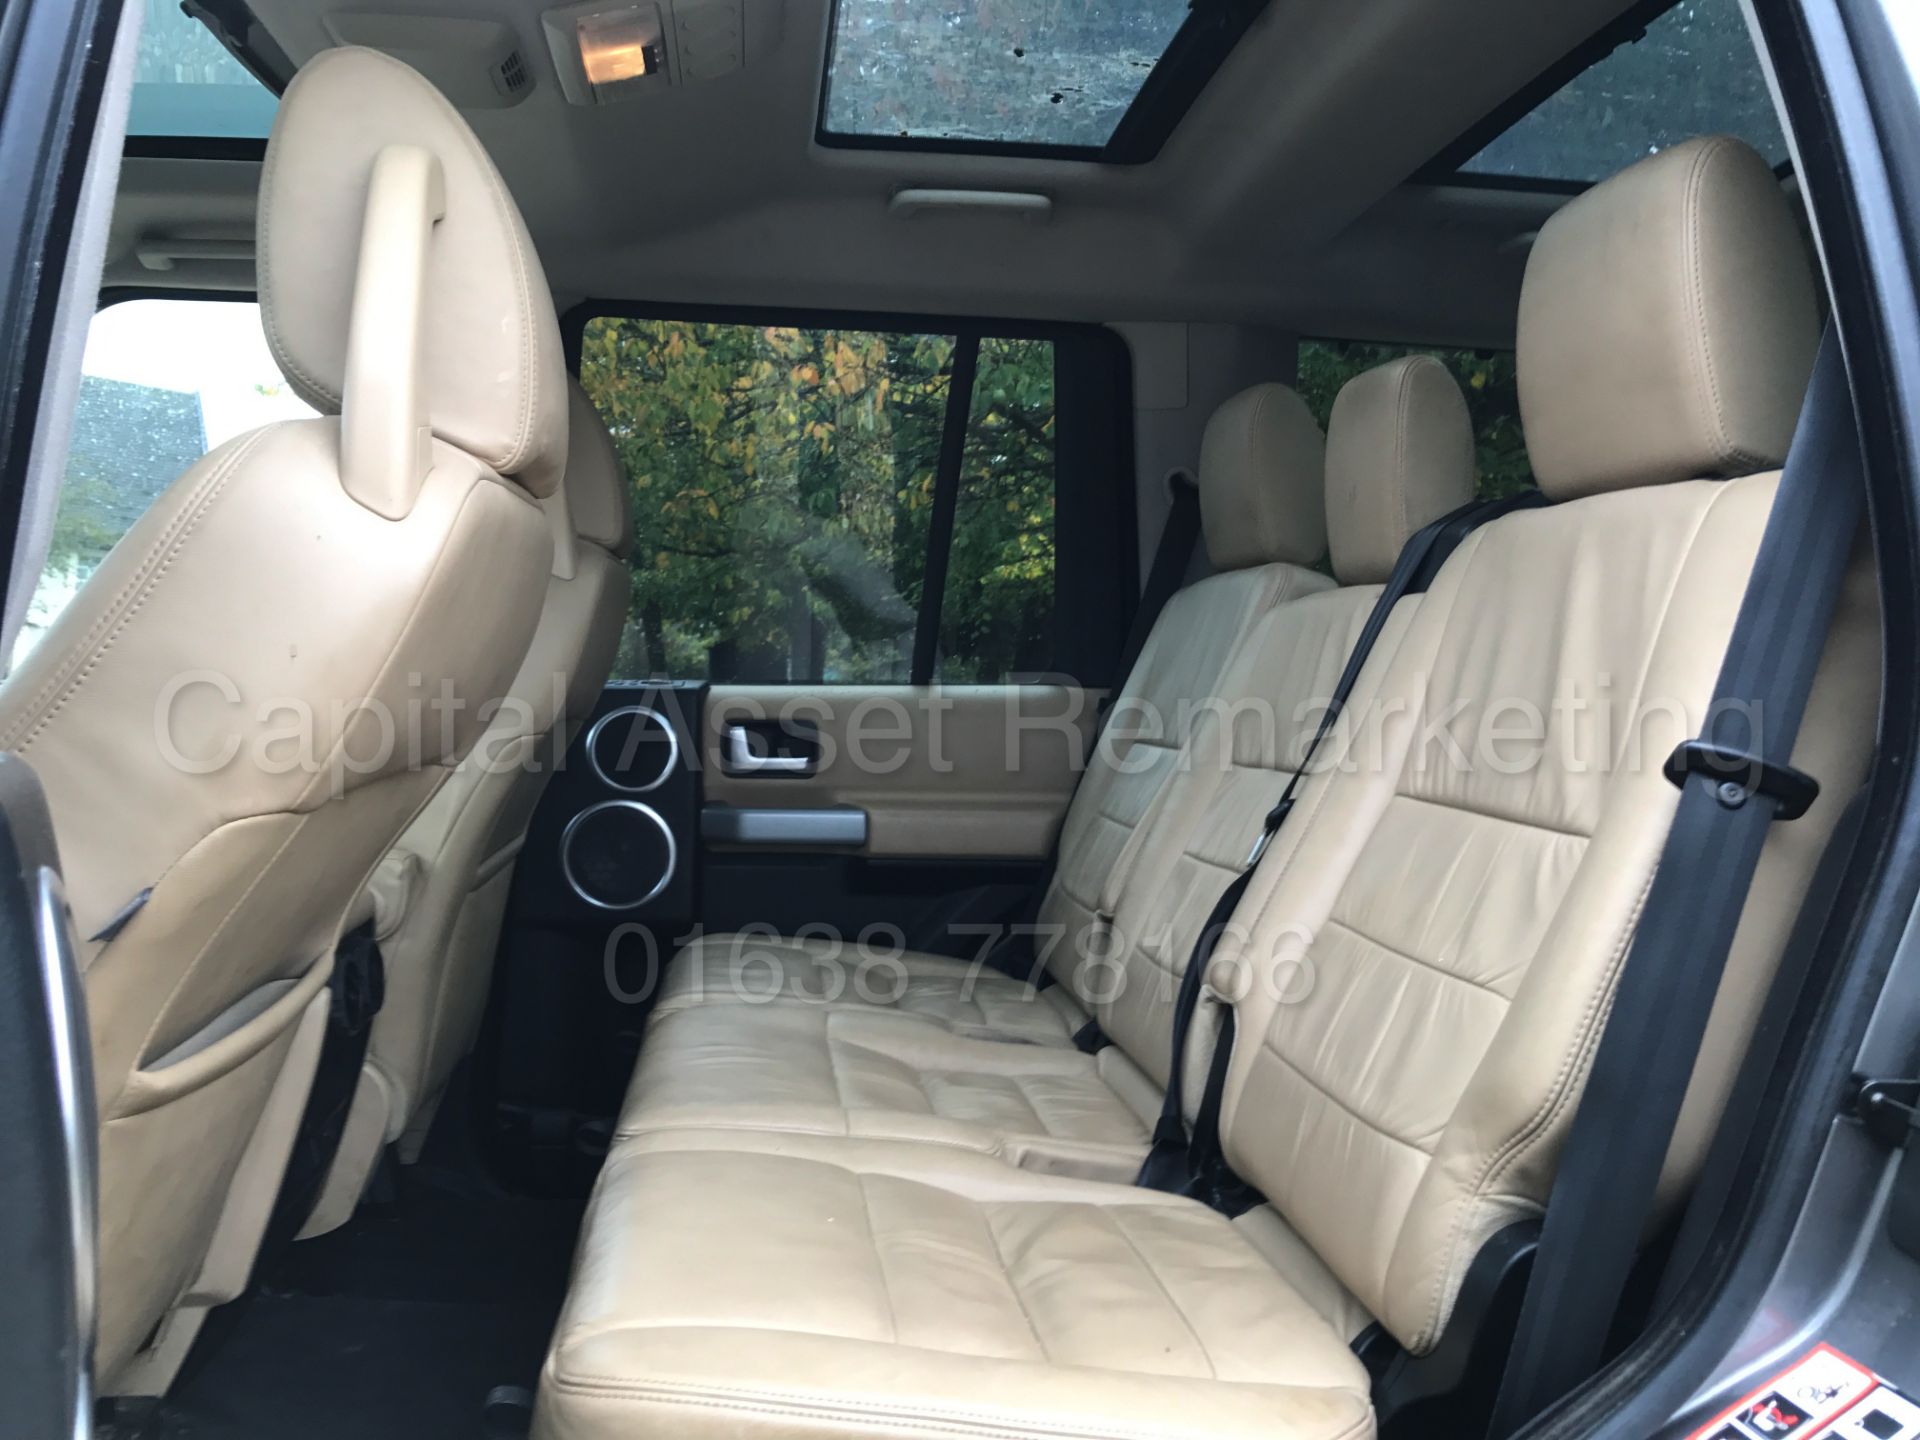 LAND ROVER DISCOVERY 3 HSE (2008 - 08 REG) 'TDV6 - AUTO - LEATHER - SAT NAV - 7 SEATER' *1 OWNER* - Image 16 of 37